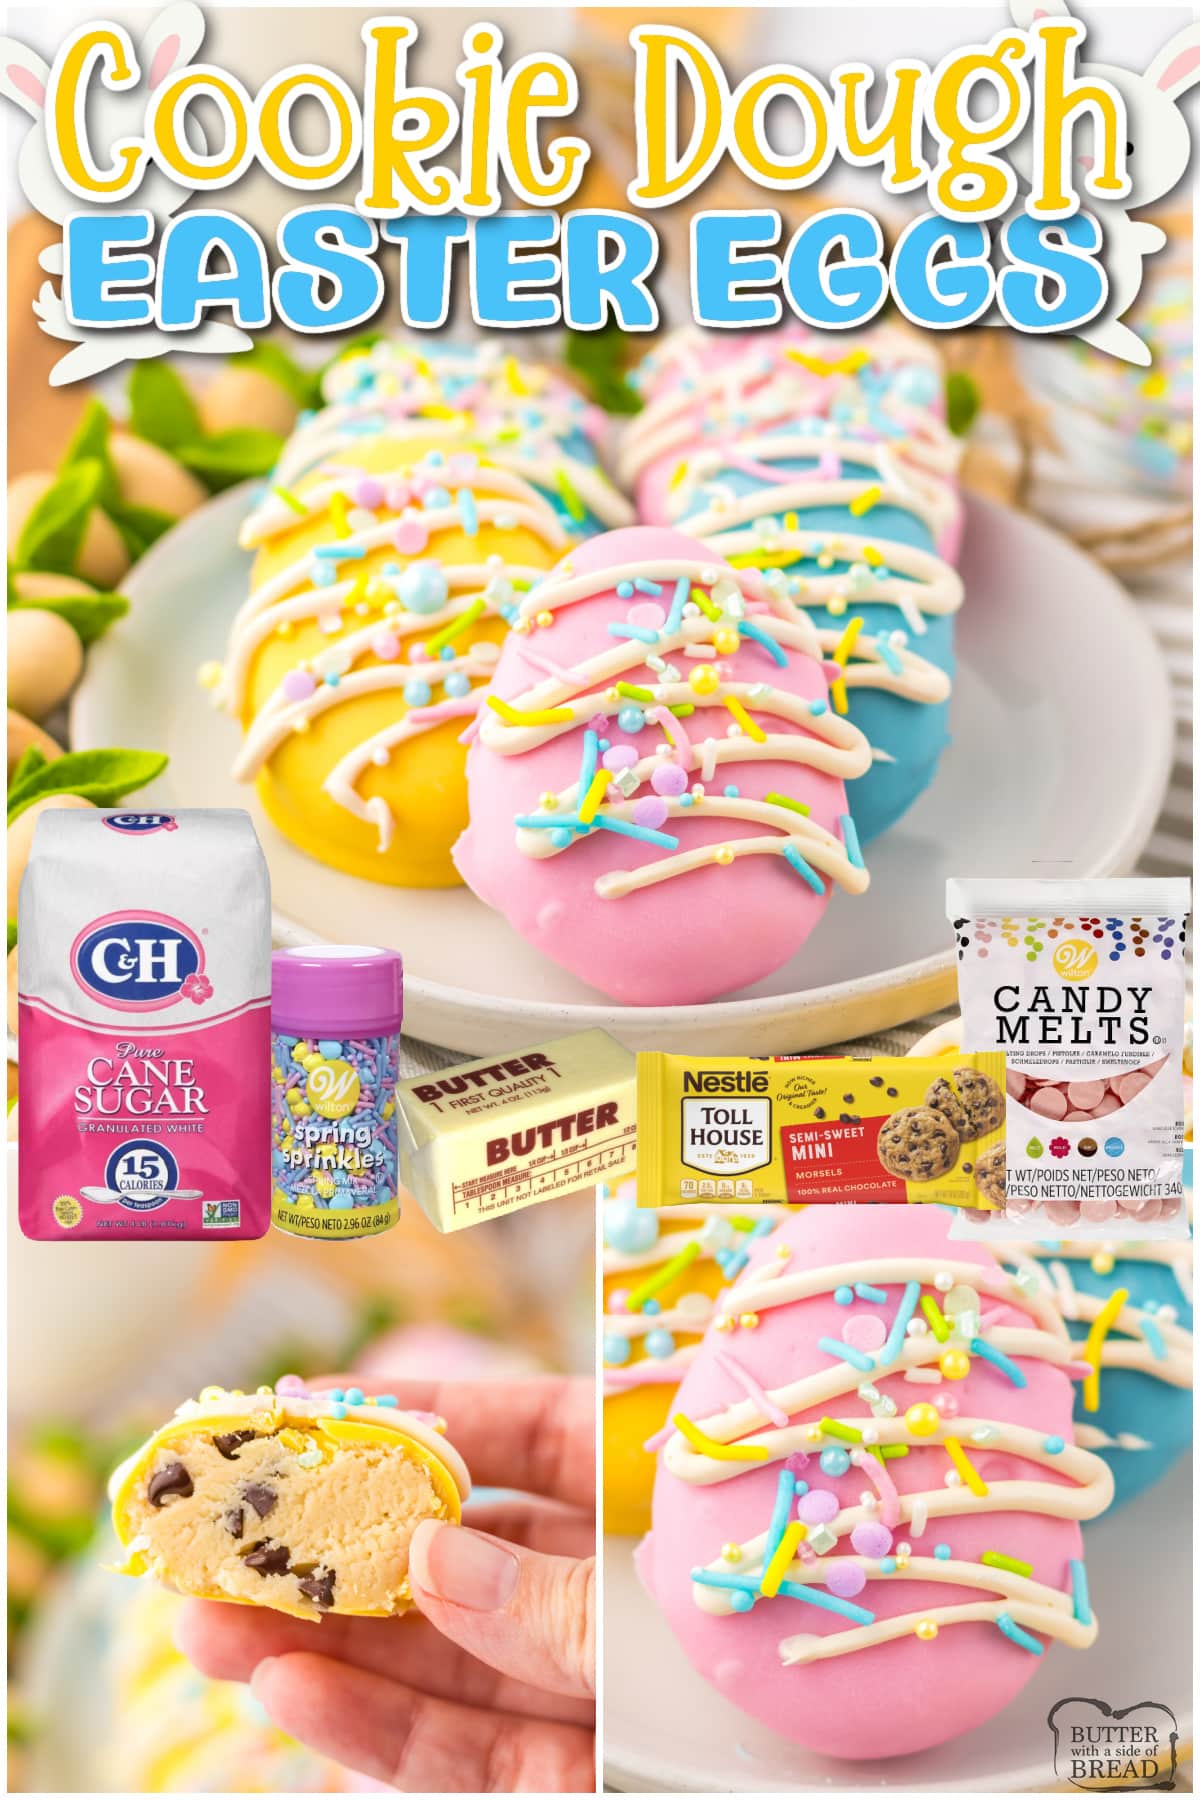 Cookie Dough Easter Eggs are the perfect no-bake dessert for Easter. Edible cookie dough in the shape of Easter eggs that are dipped in pastel-colored chocolate and then decorated.  